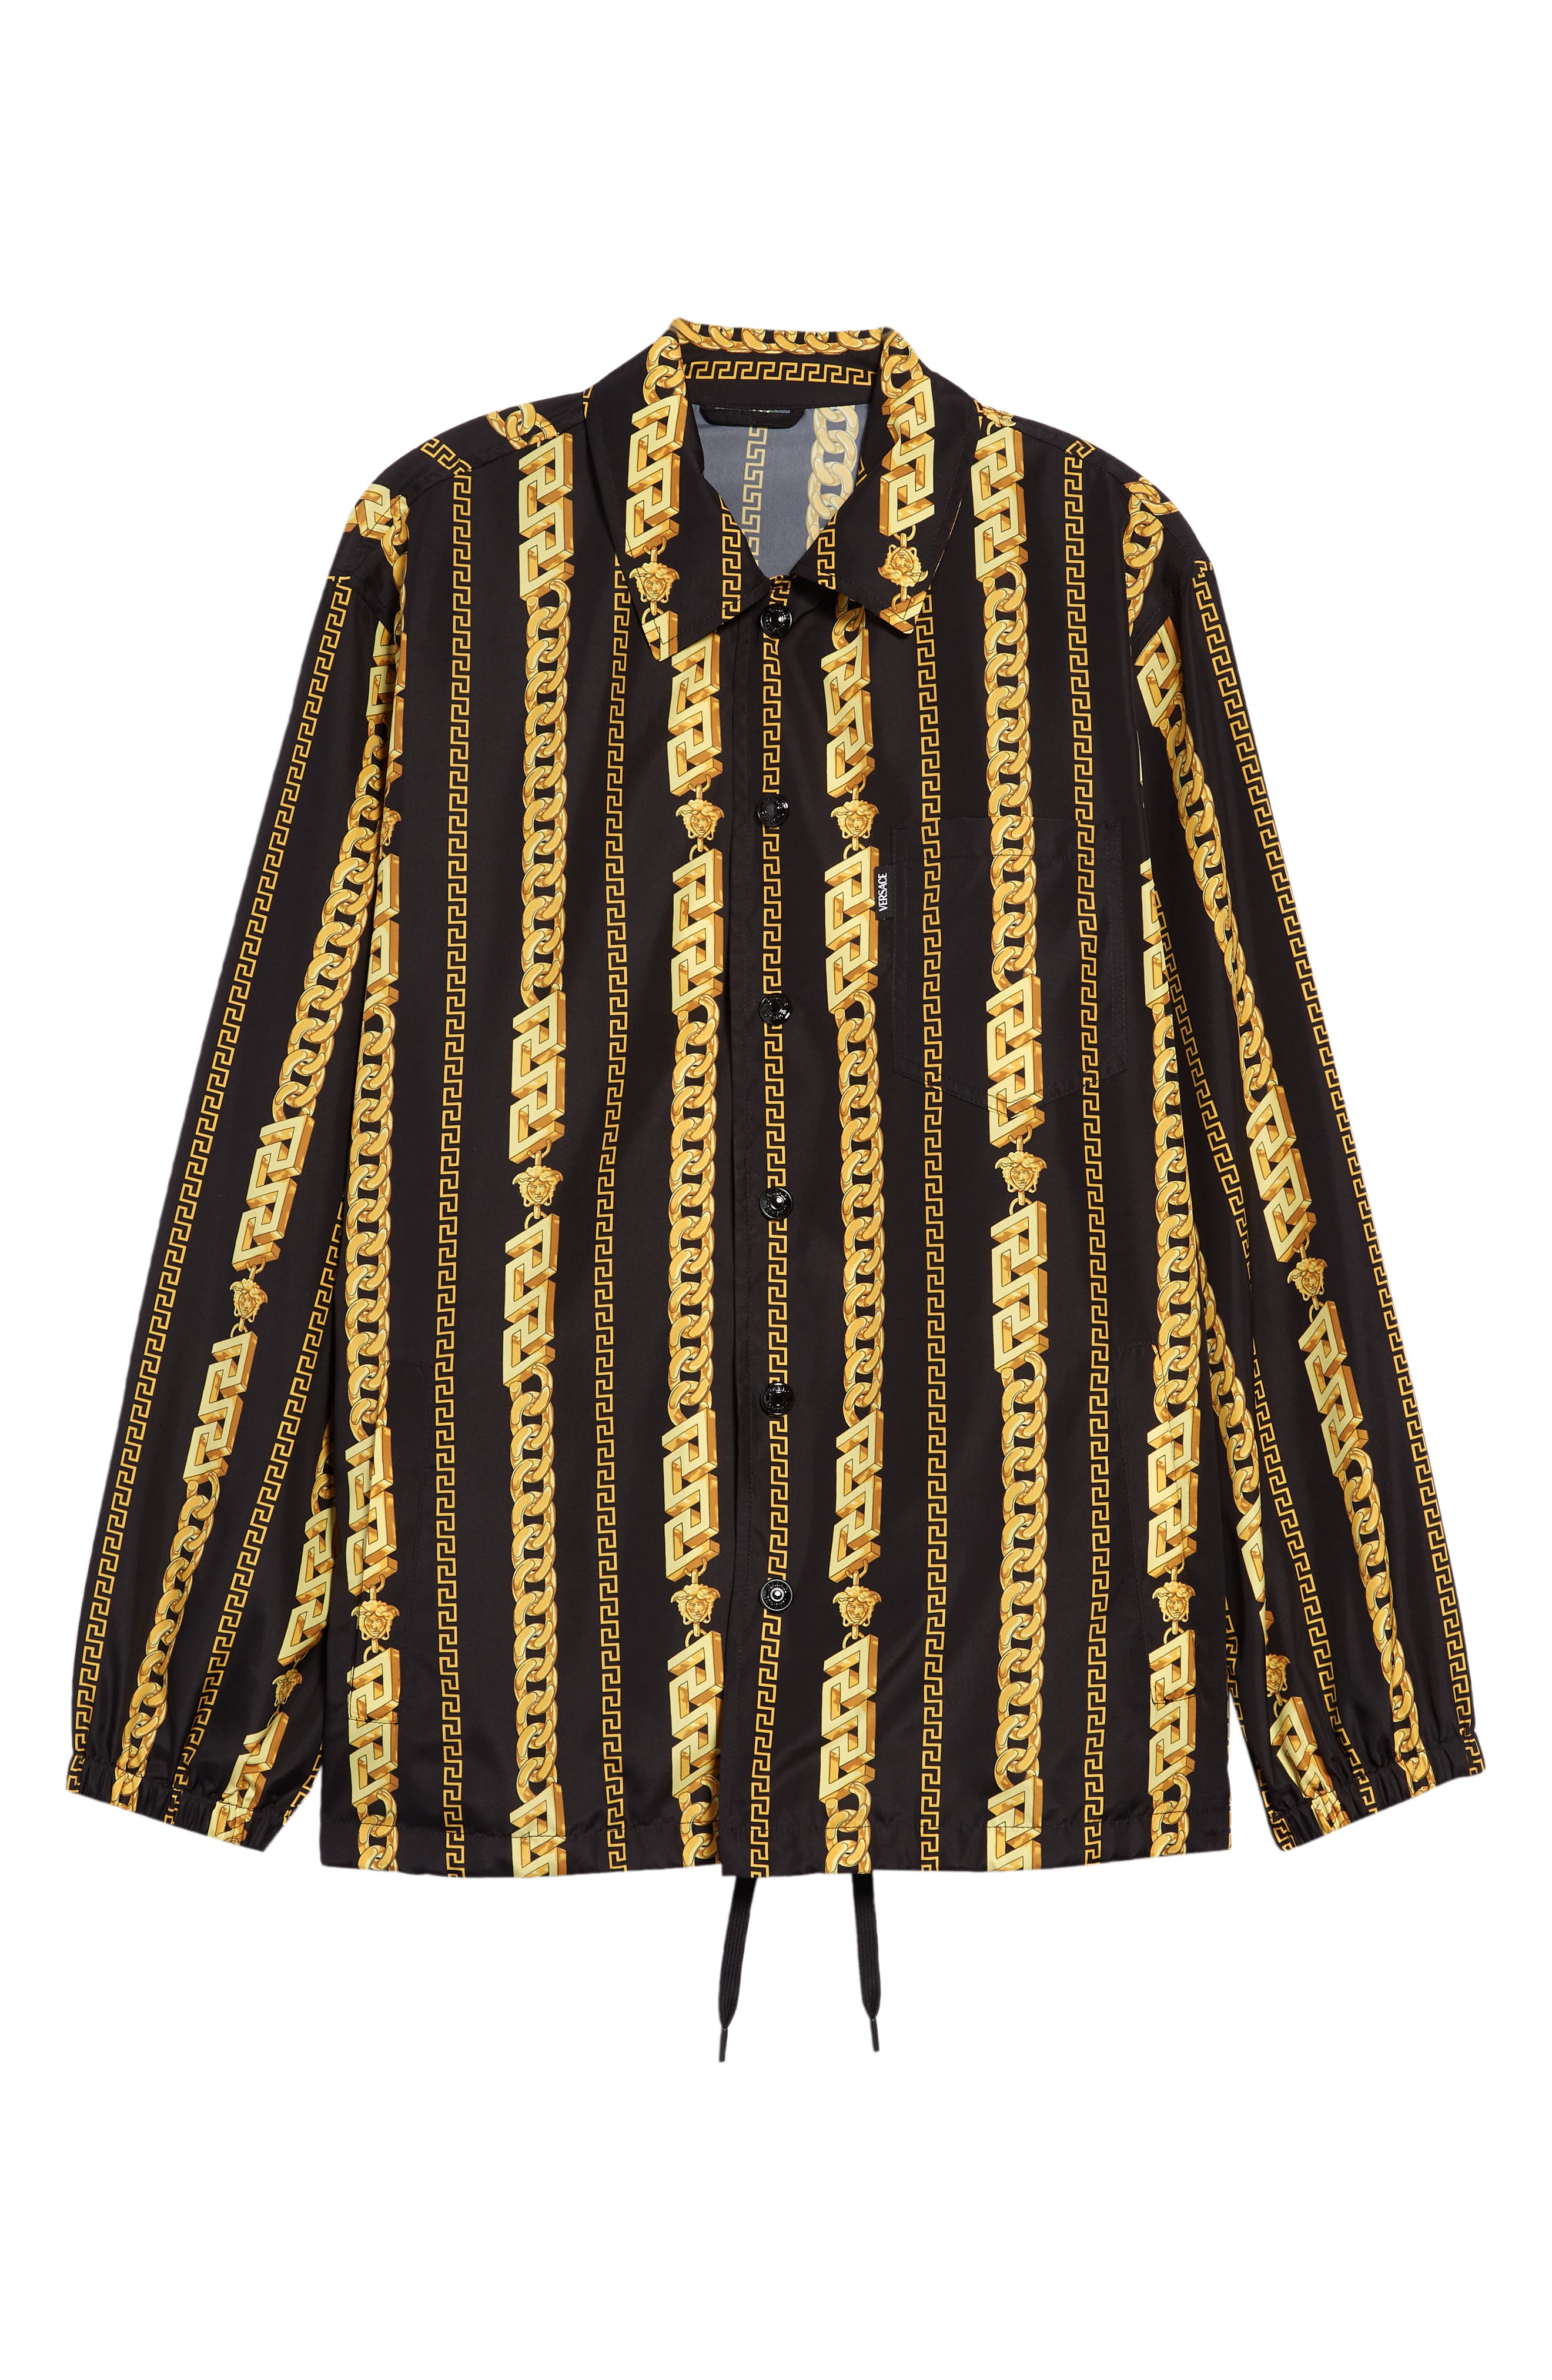 Versace Men's Chain Print Coach's Jacket in Black Gold at Nordstrom, Size 38 Us